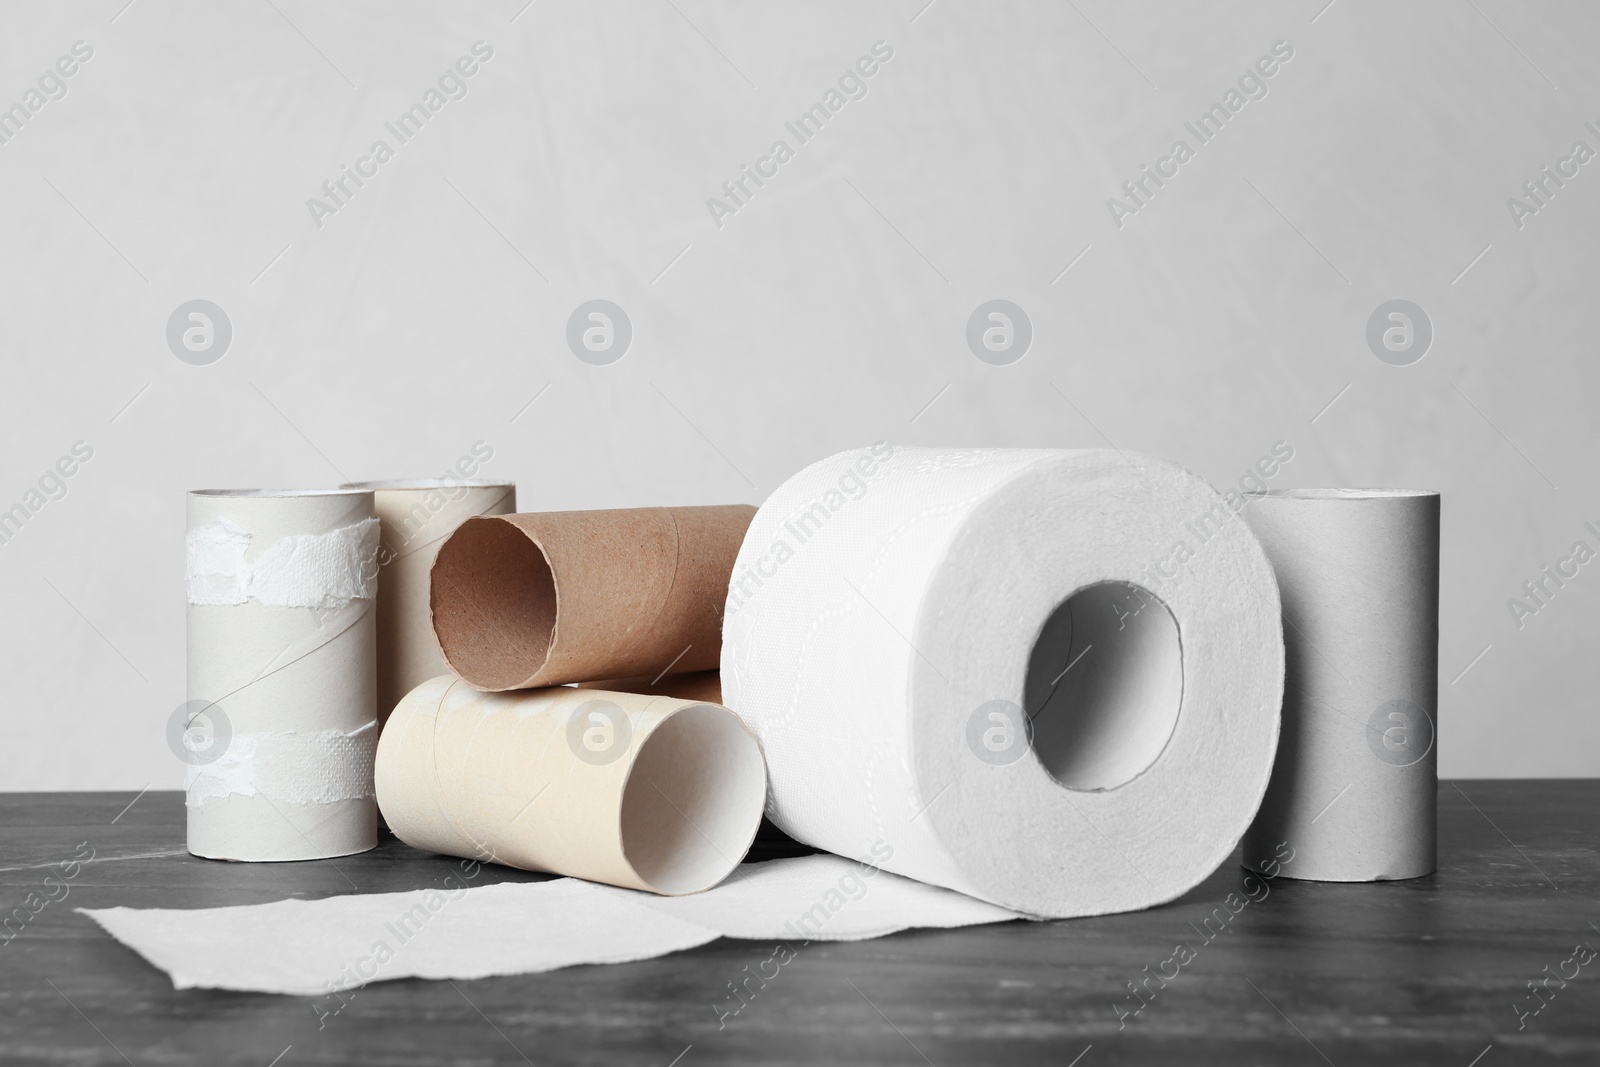 Photo of Full and empty toilet paper rolls on table against grey background